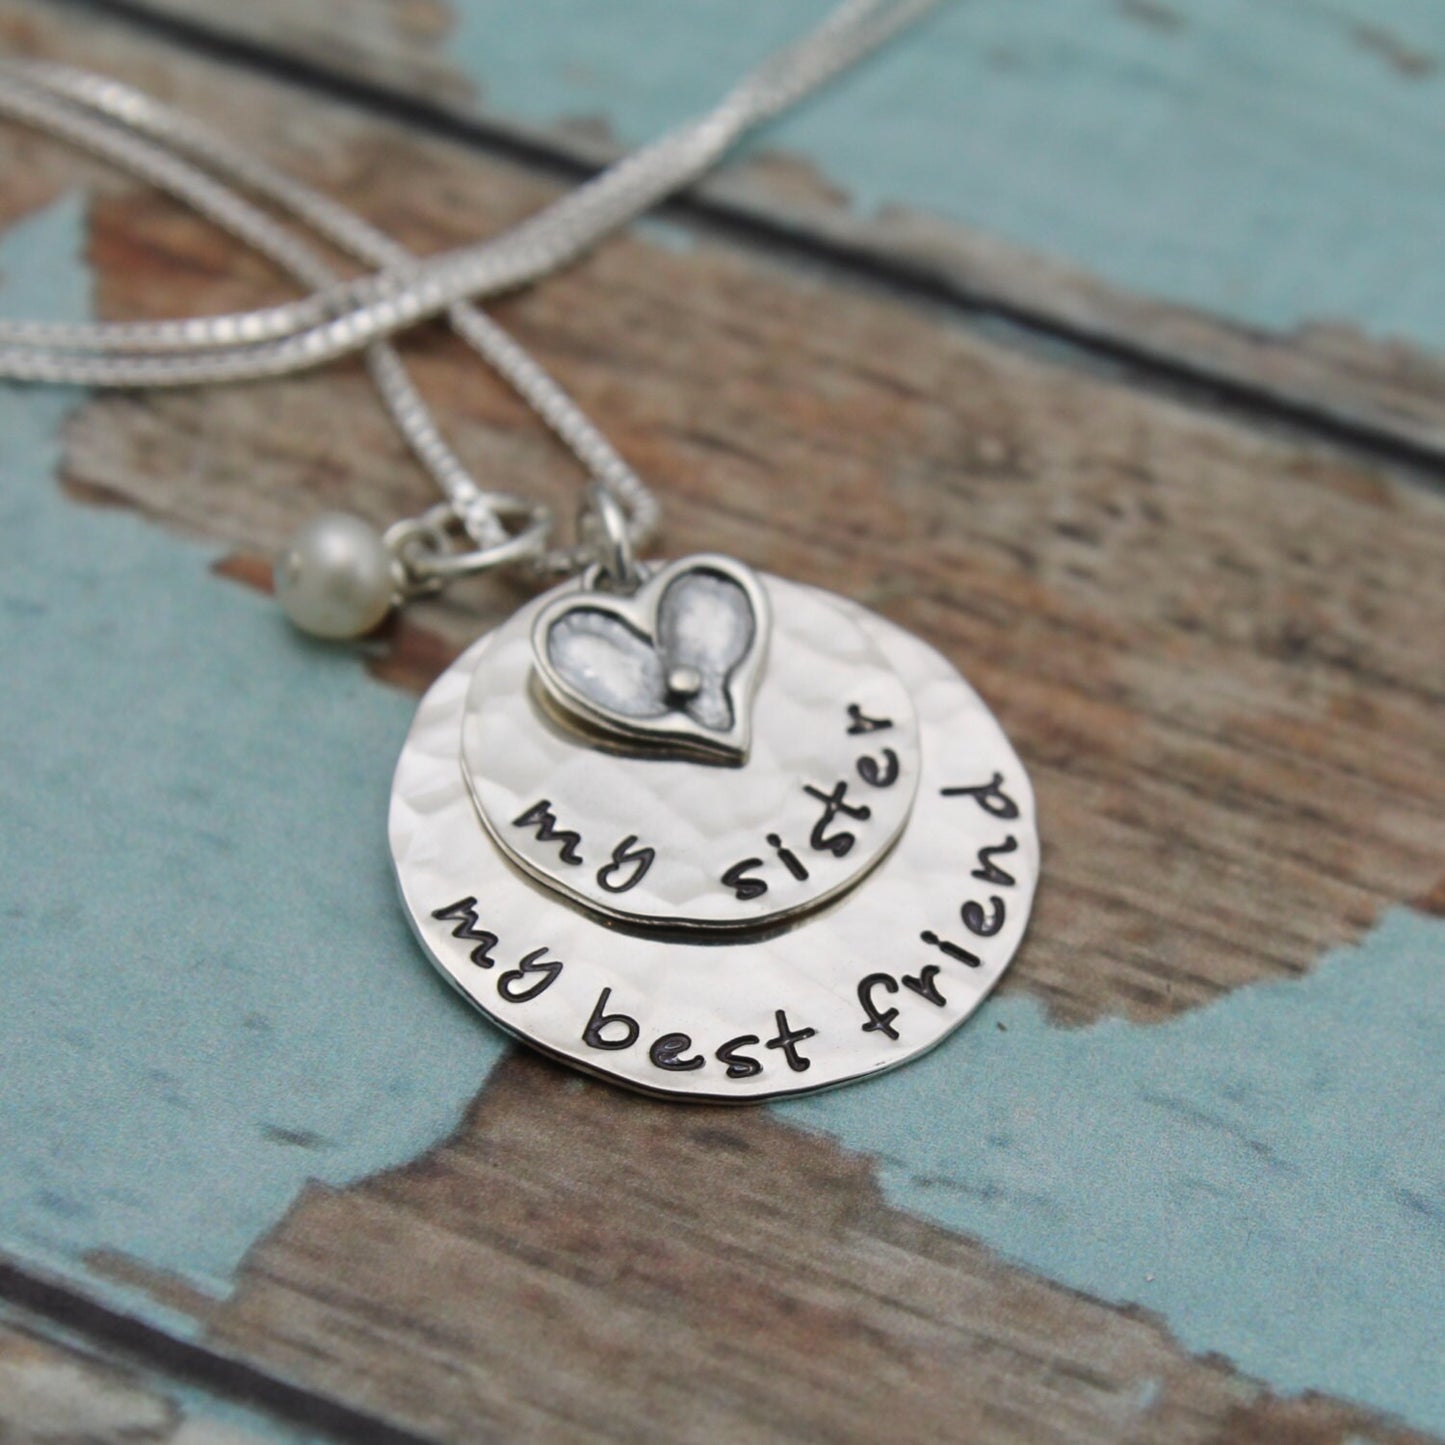 My Sister, My best friend, Sister Necklace, Sister Gift, Sisters Necklace, Sisters Gift, Hand Stamped Sister Jewelry, Sibling Jewelry